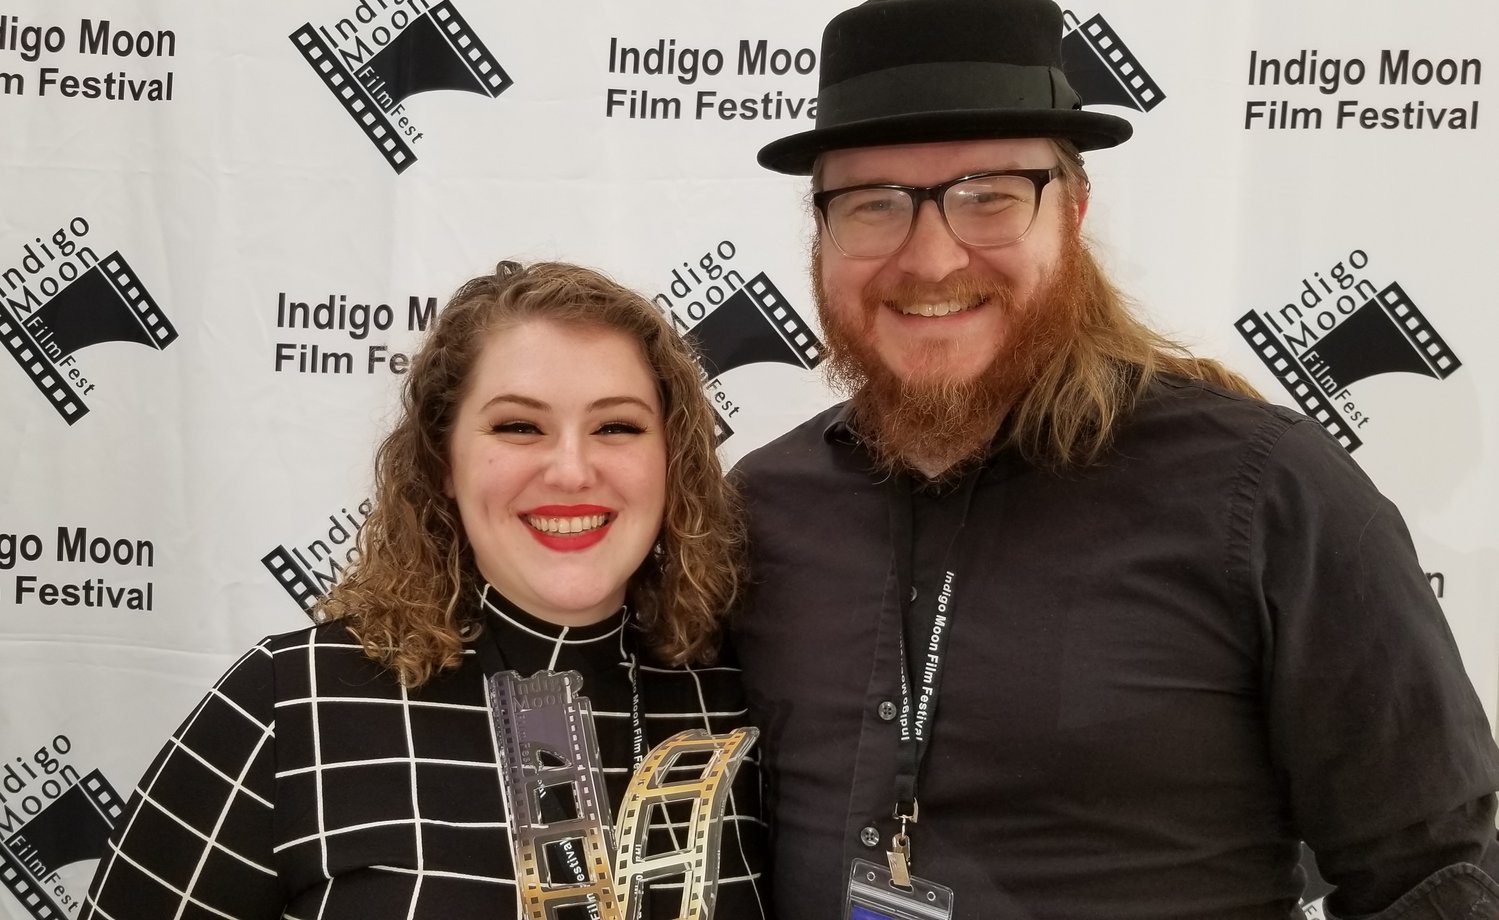 Kaitlyn and Kenneth Forrester won in the films that inspire change category for 'Rock Island Woman' at the 2022 Indigo Moon Film Fest.